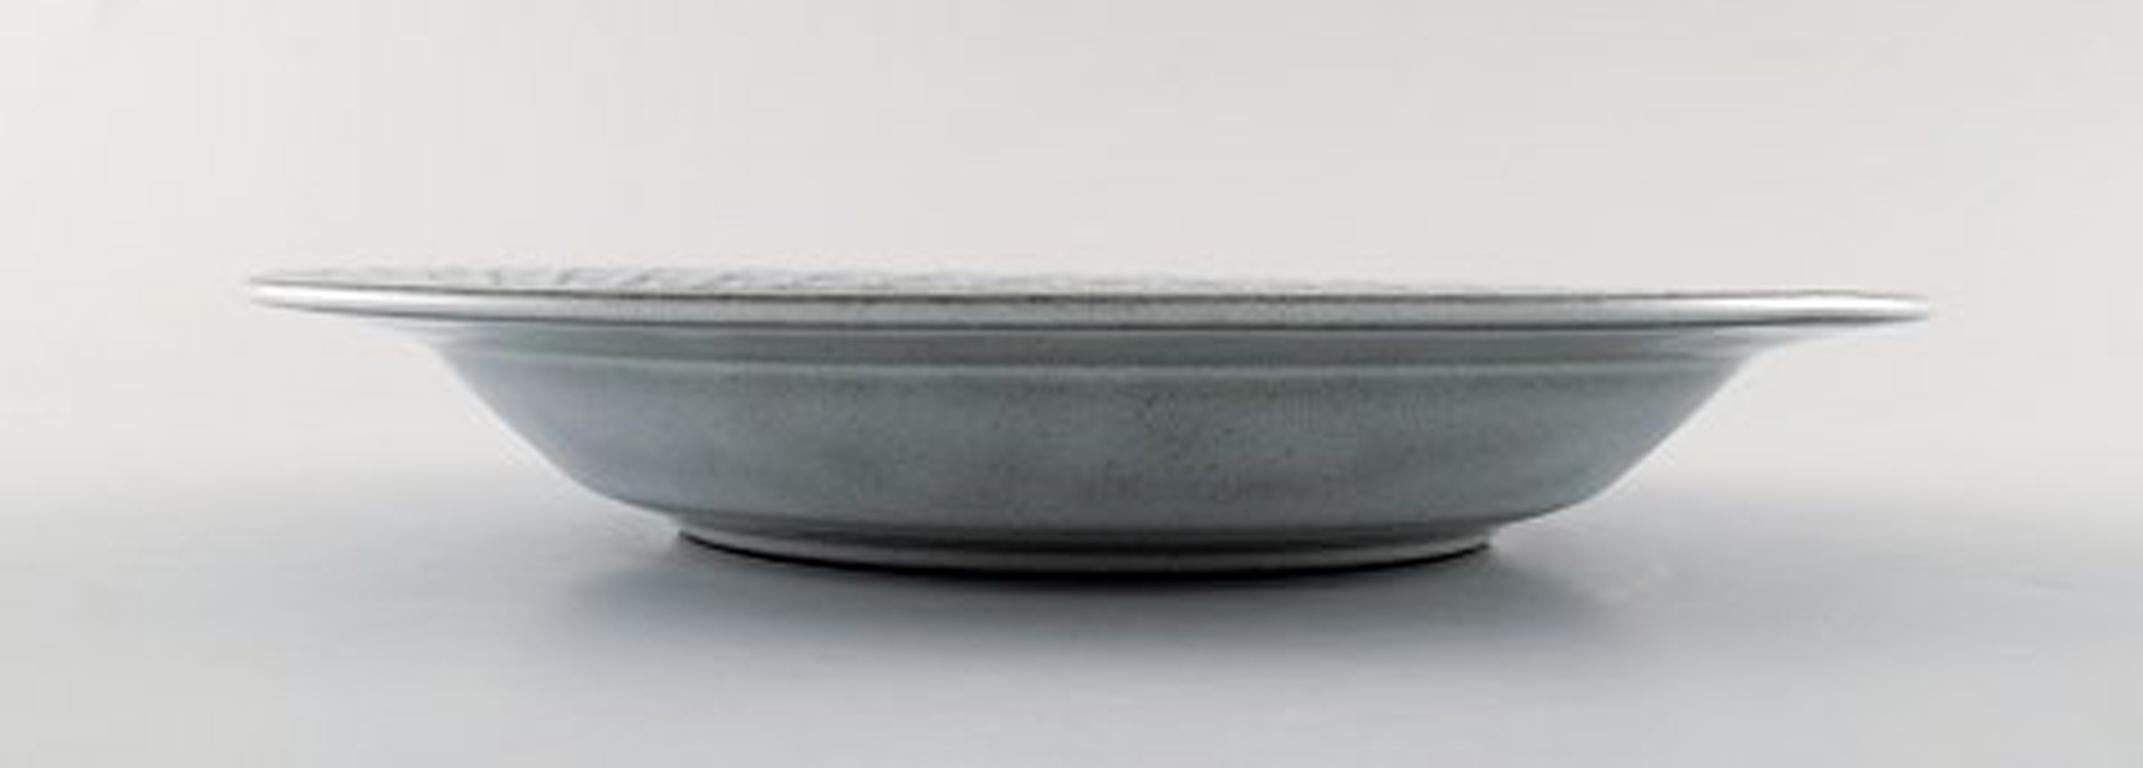 Bing & Grondahl number 322. Set of 7 deep plates.
B & G Grey Cordial Quistgaard Nissen Kronjyden stoneware.
Measures: 21.2 cm. Height 3 cm.
In perfect condition.
Stamped Kronjyden or Bing & Grondahl Copenhagen Stoneware: Designed for Kronjyden